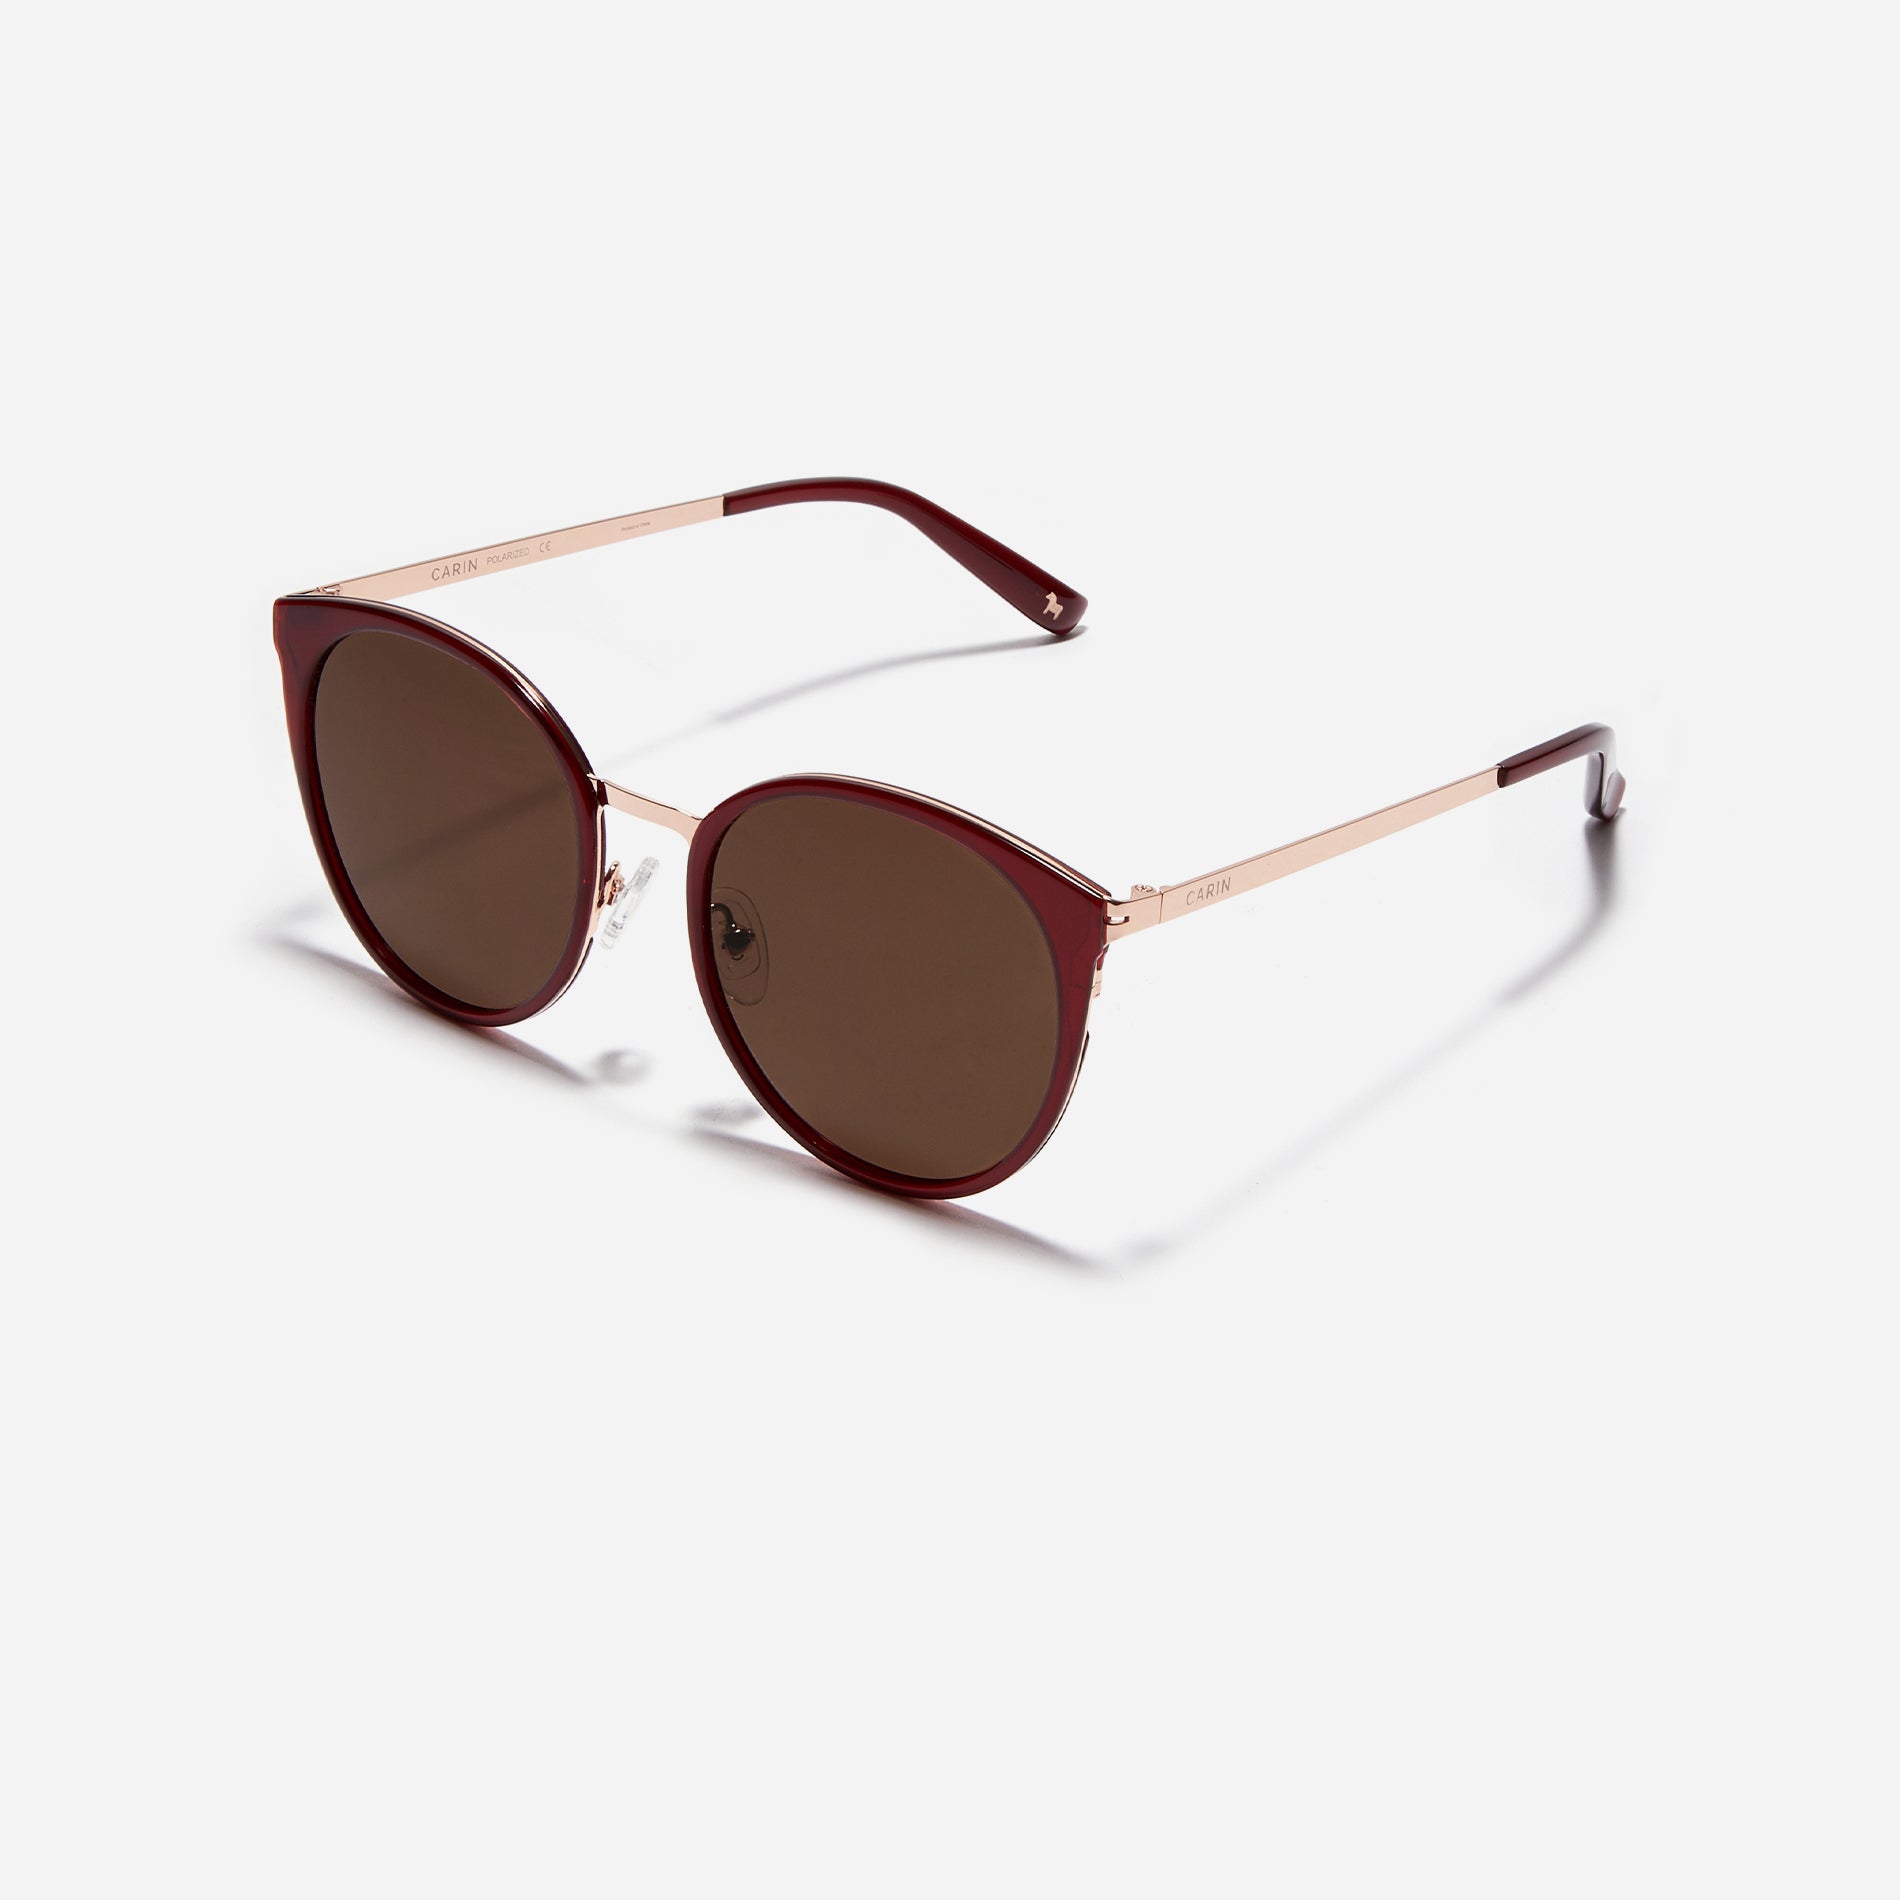 Round-shaped combination polarized sunglasses that feature delicate acetate rims and metal structural details.